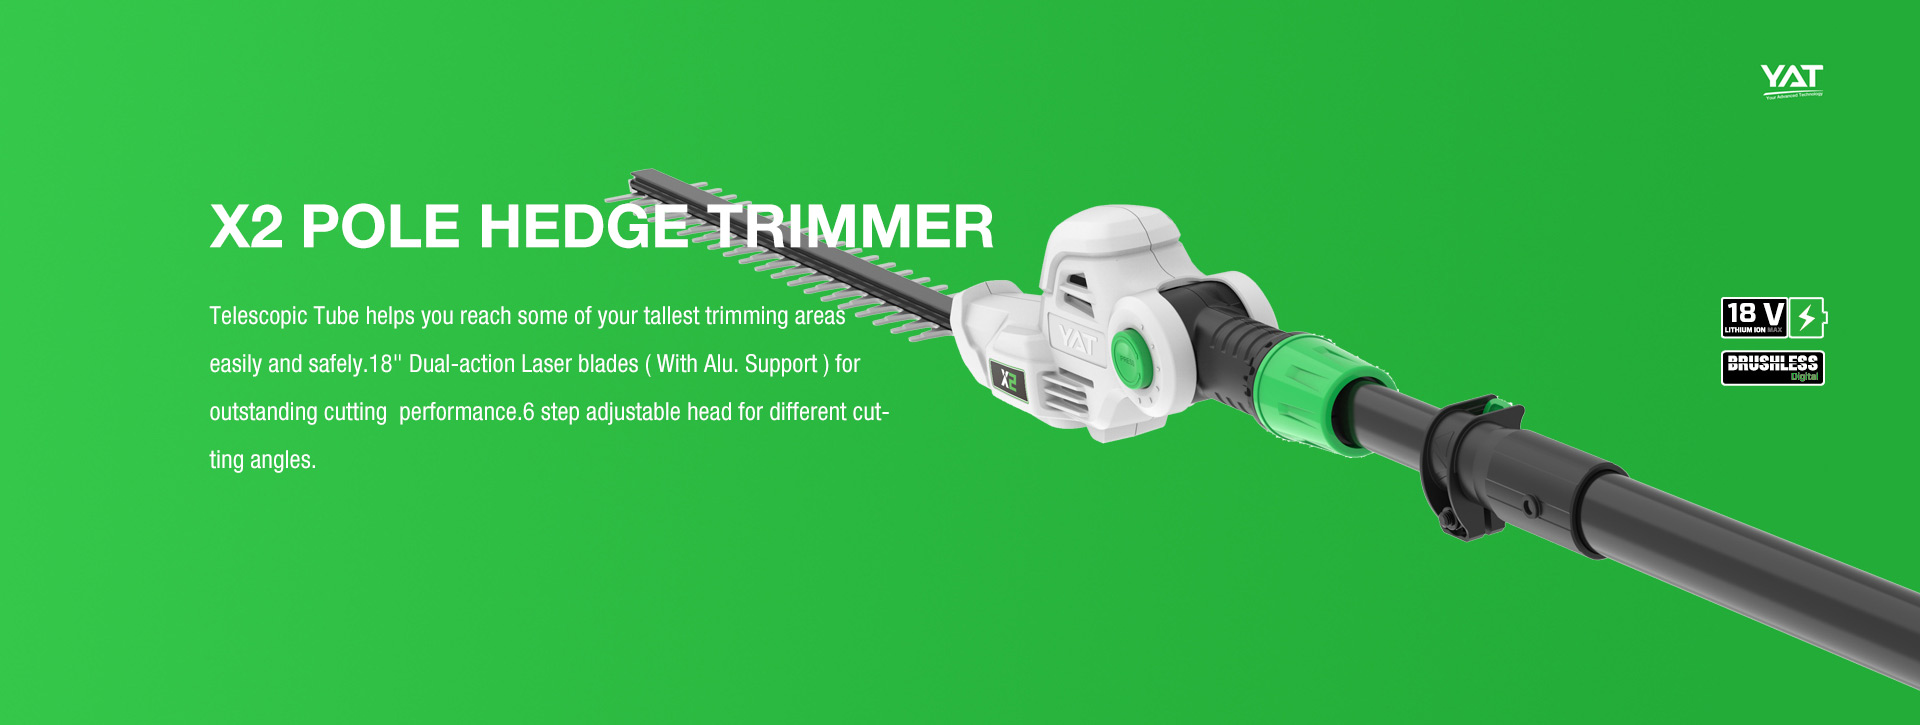 X2 POLE HEDGE TRIMMER